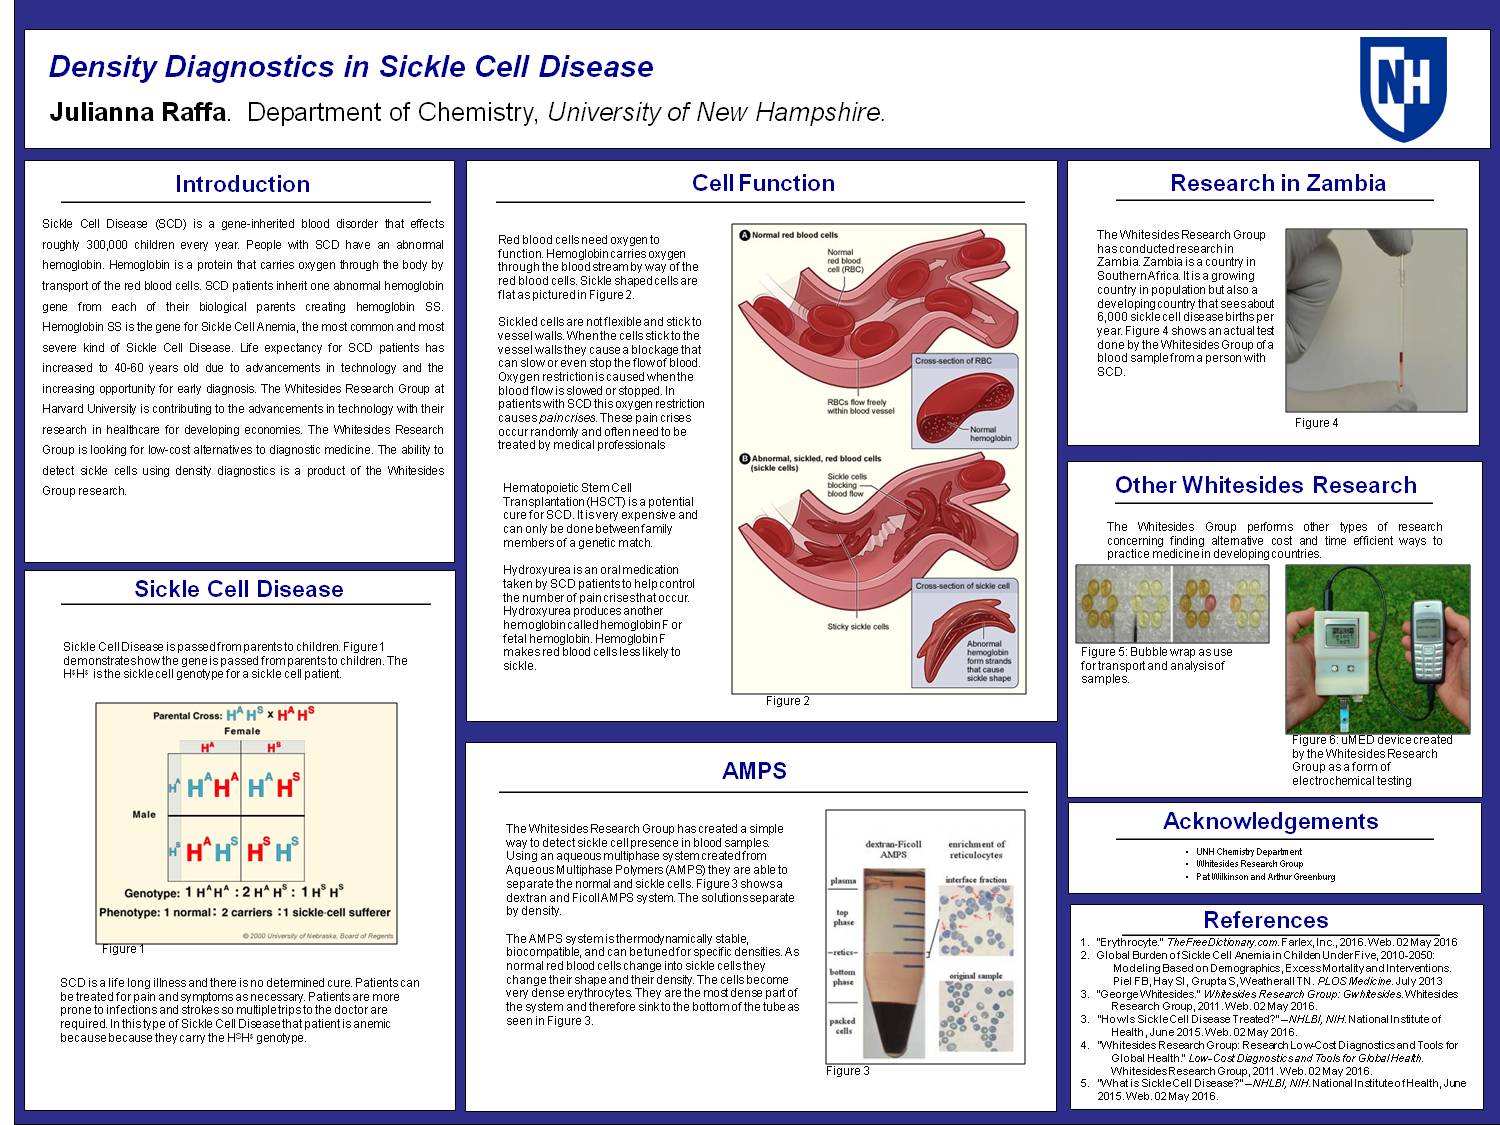 Density Diagnostics In Sickle Cell Disease by jdn87